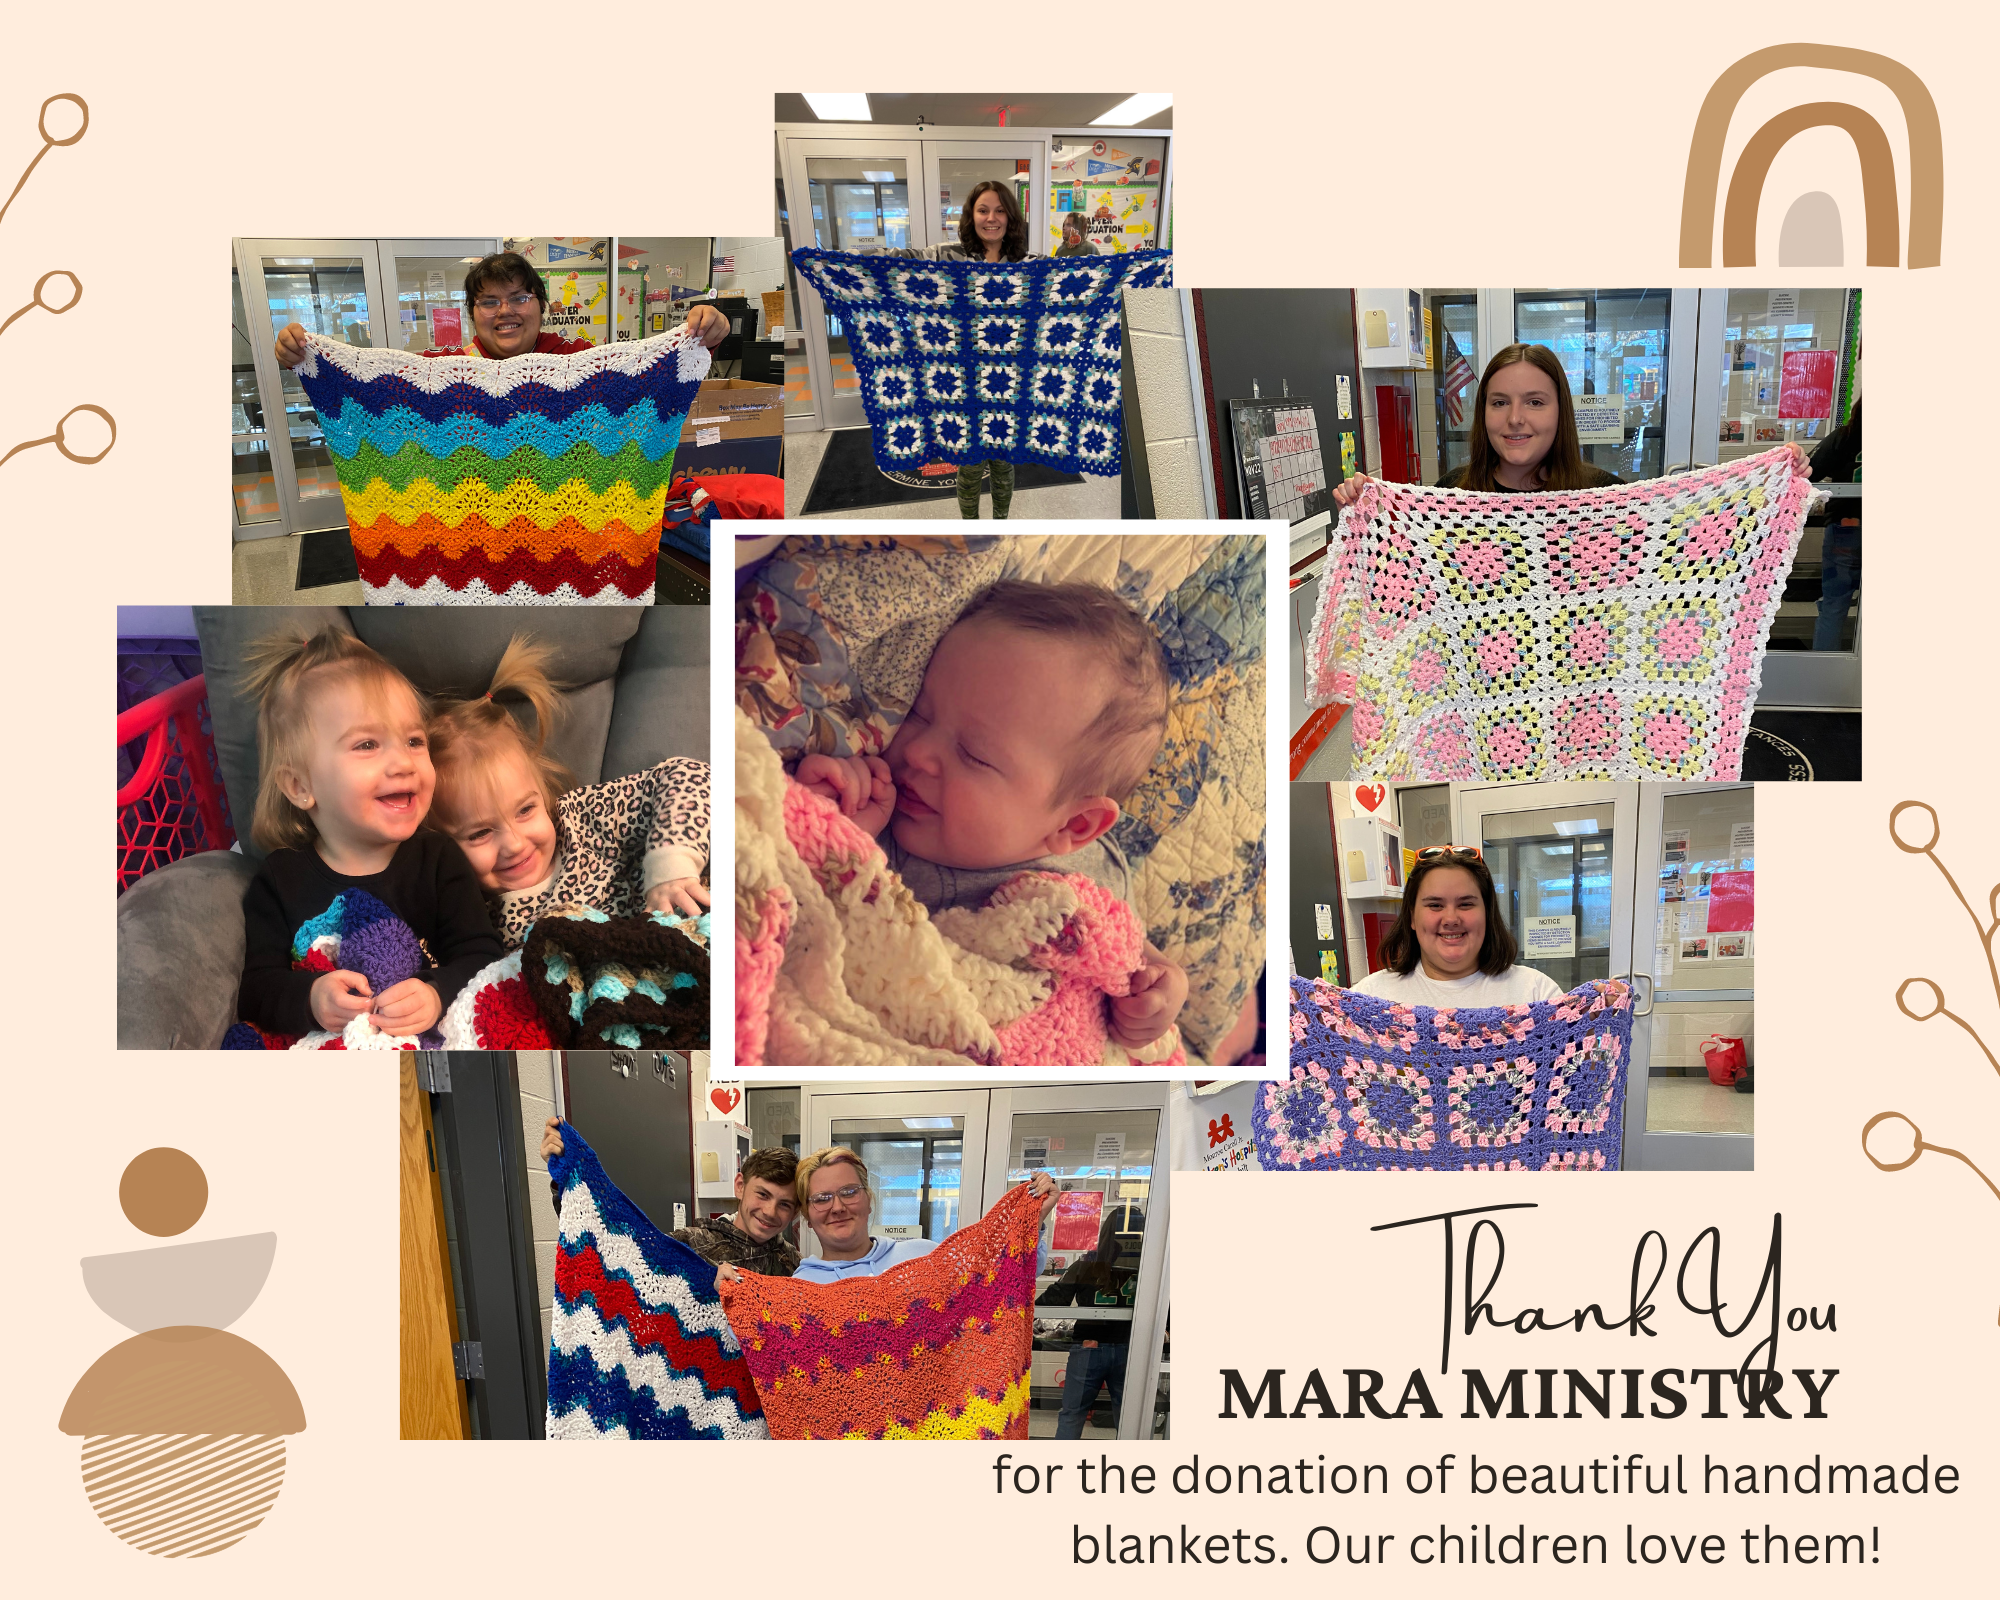 This is a picture of handmade blankets that were donated to our students by Mara Ministry.